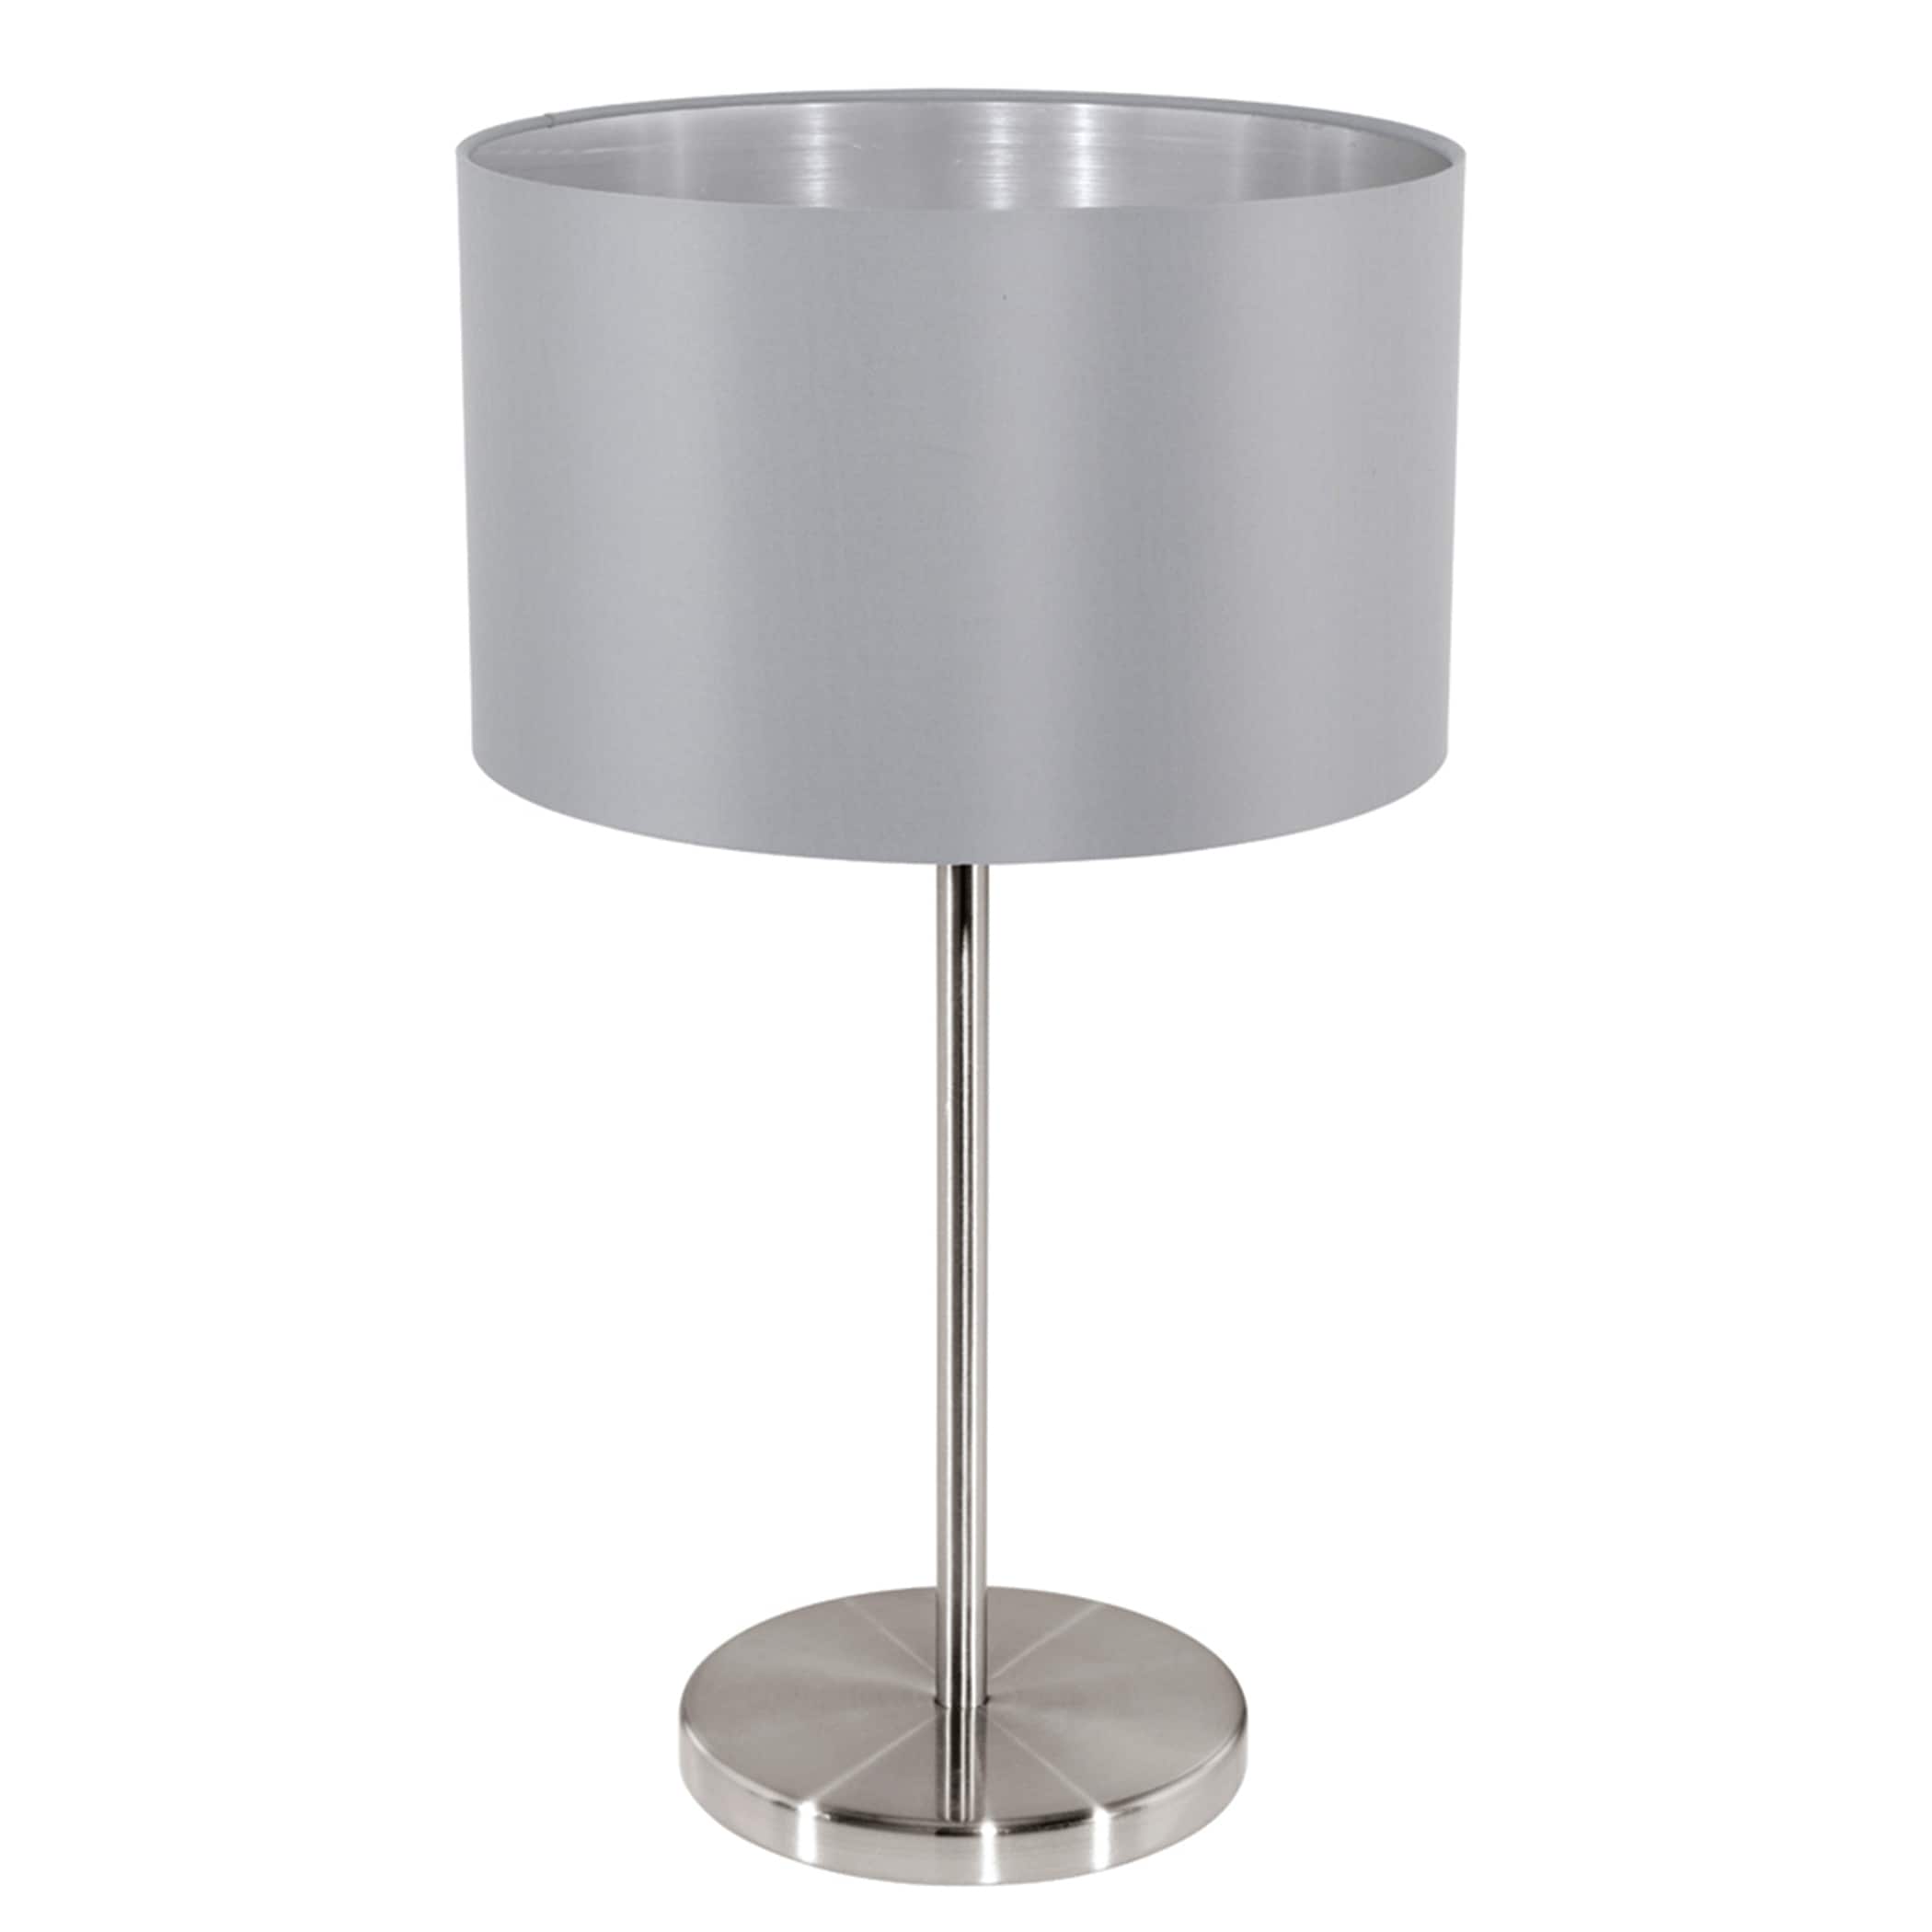 Eglo Maserlo 1-Light Matte Nickel Table Lamp with Gray Silver Shade